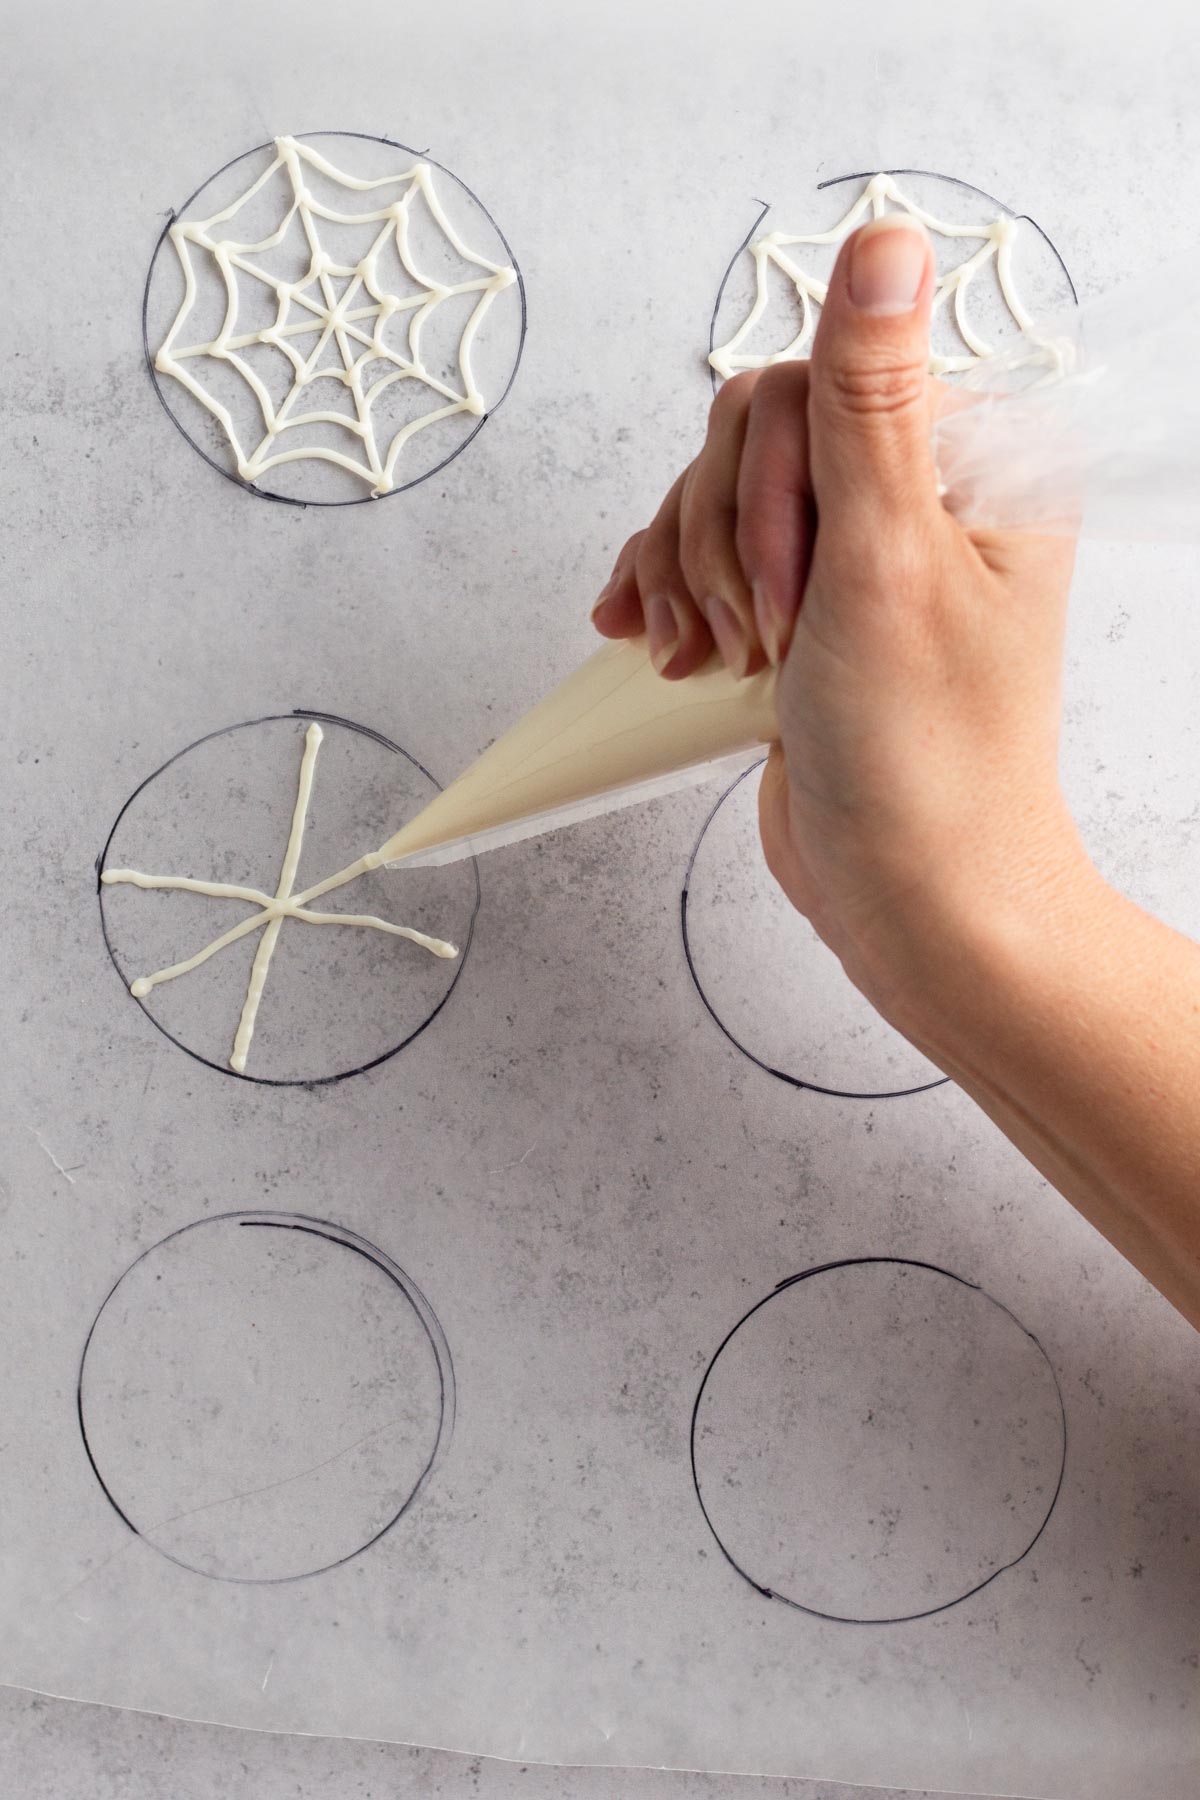 Hand piping intersecting lines of melted white chocolate onto wax paper.